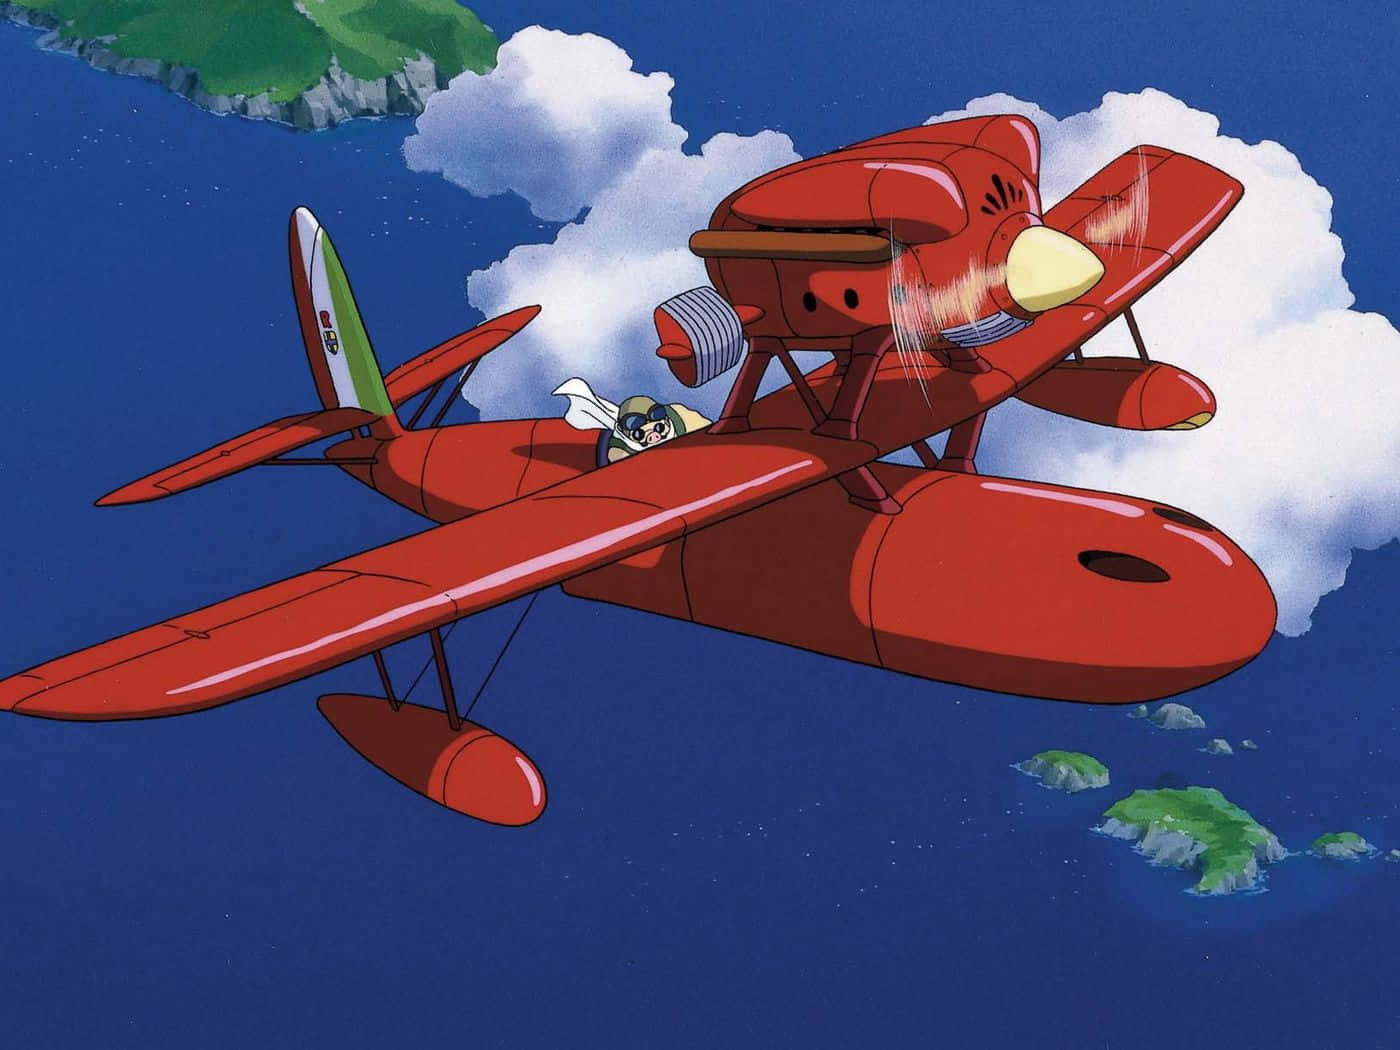 Porco Rosso Flying over the Adriatic Sea Wallpaper